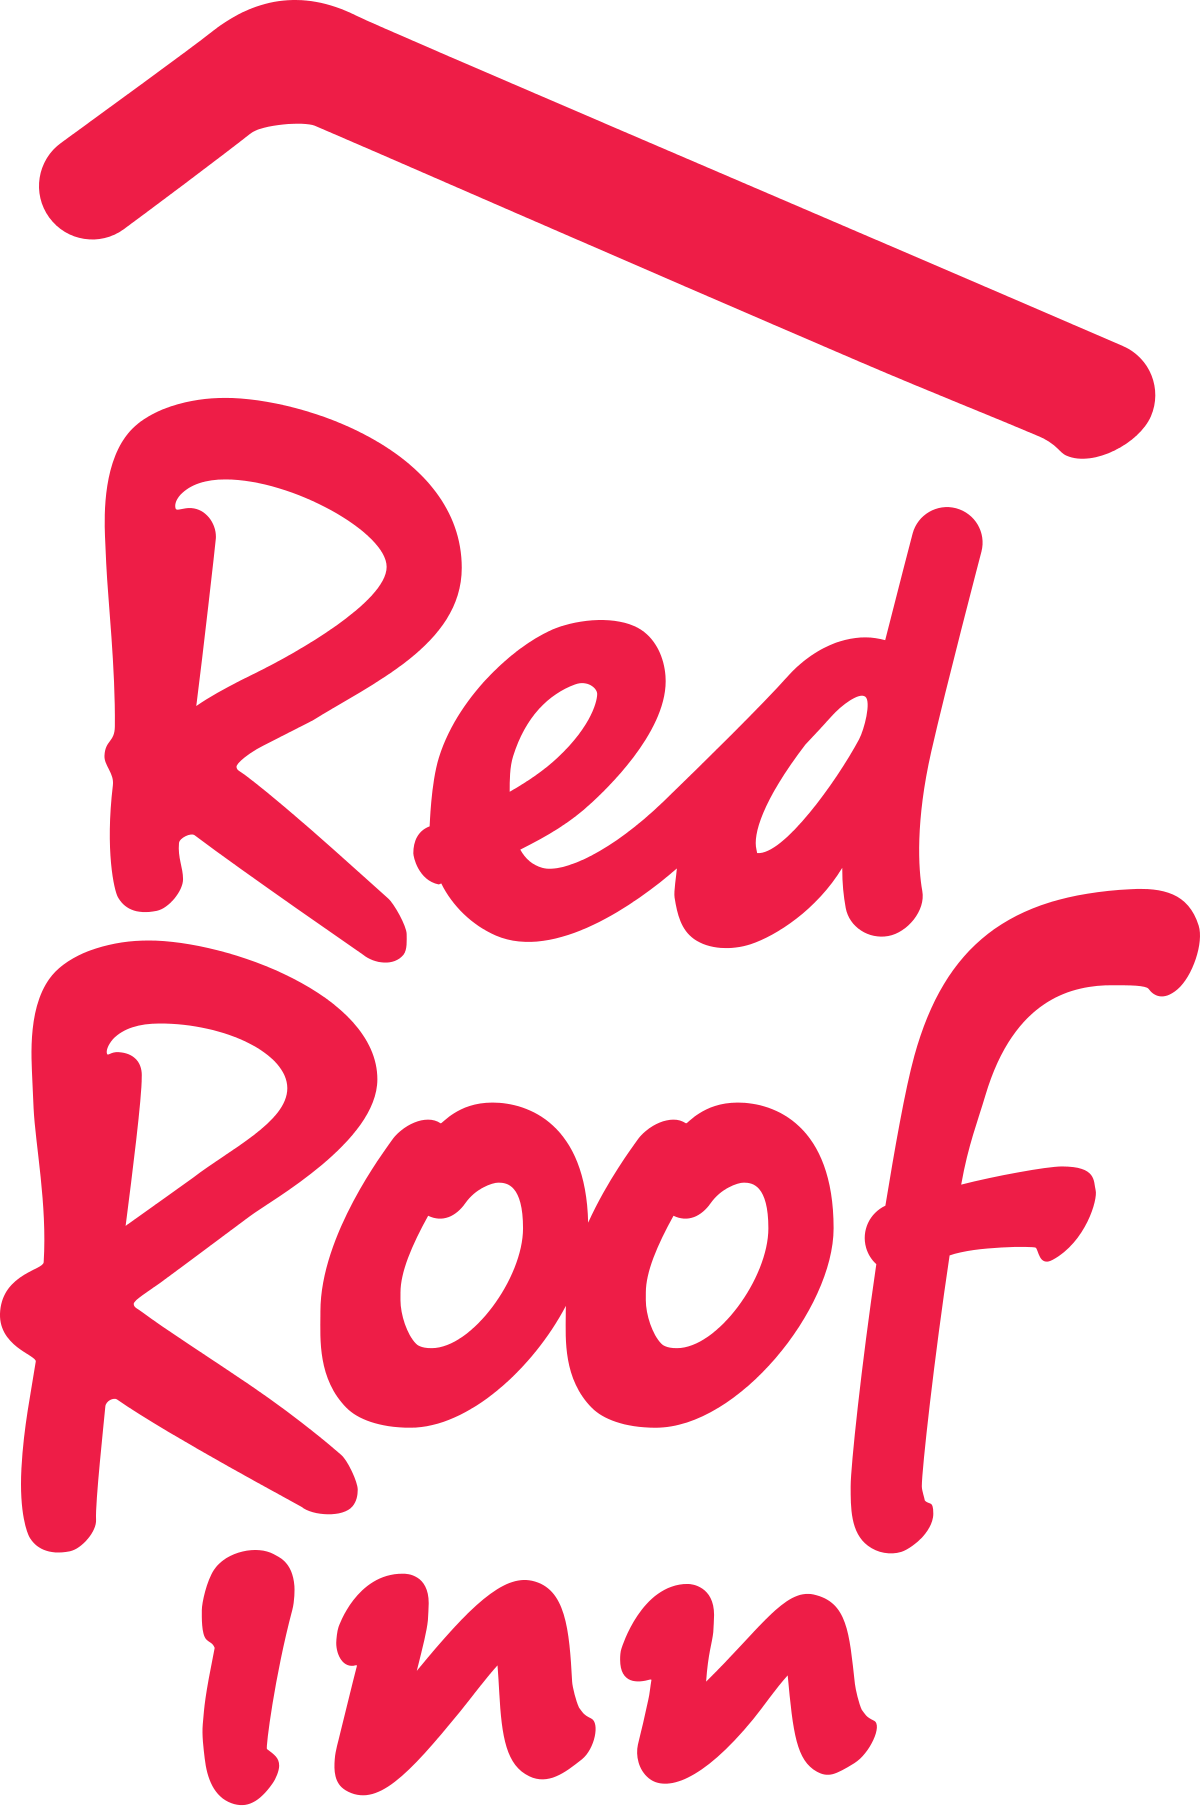 a red roof inn logo on a white background